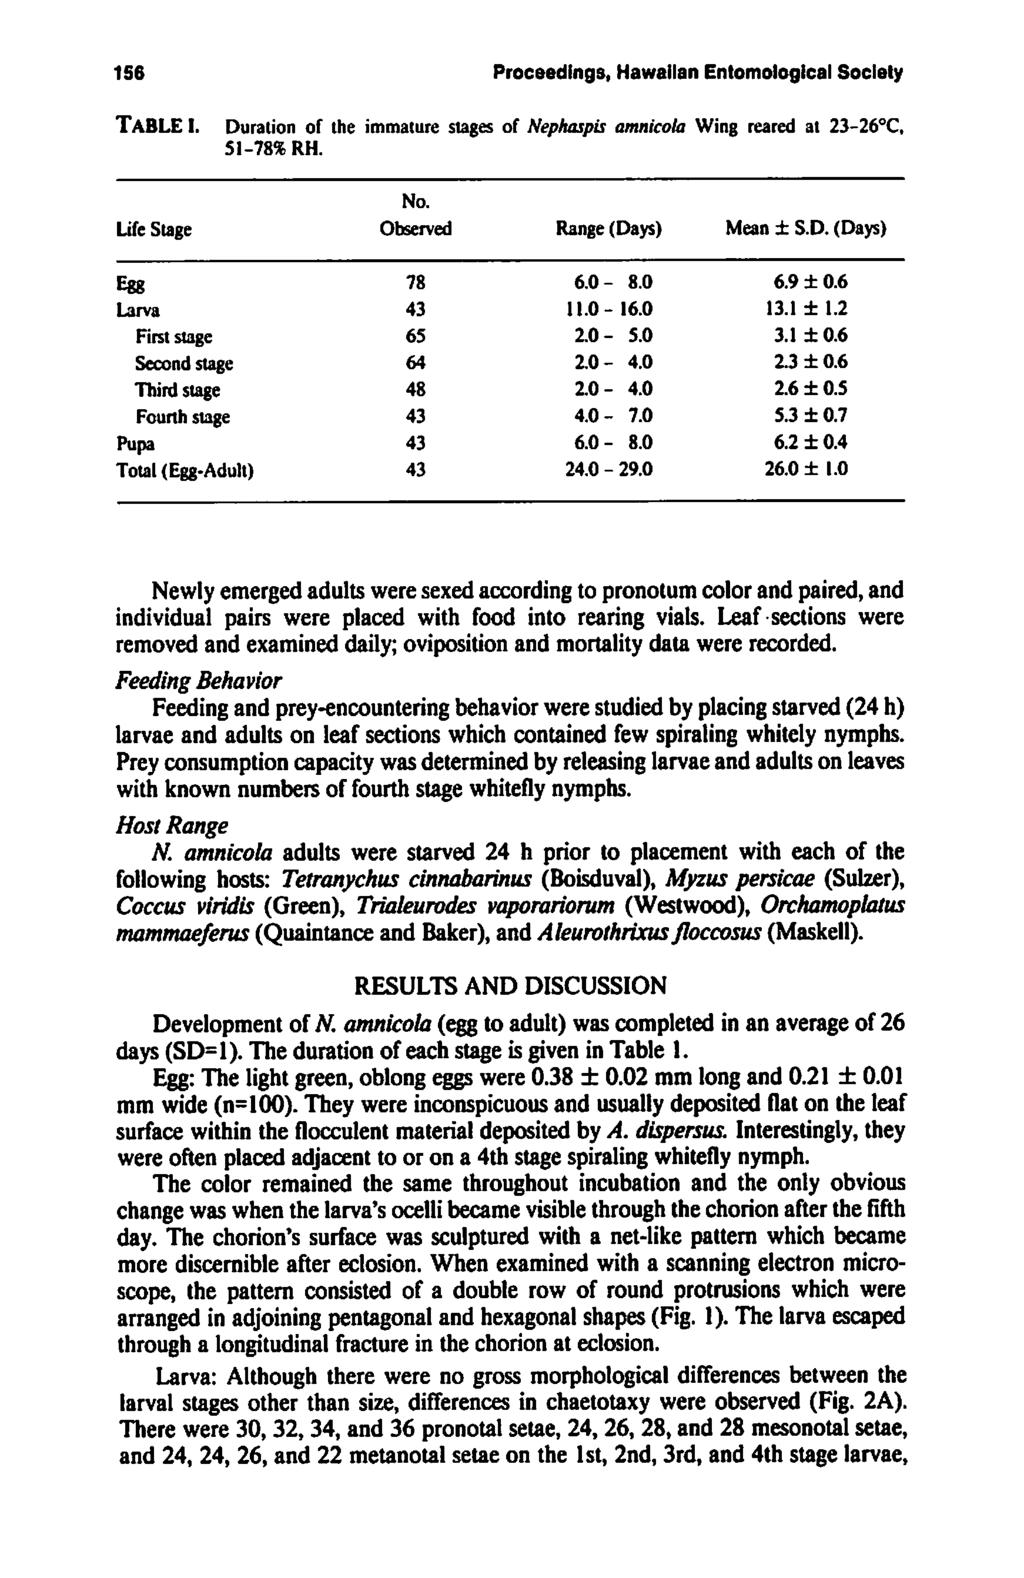 156 Proceedings, Hawaiian Entomological Society TABLE I. Duration of the immature stages of Nephaspis amnicola Wing reared at 23-26 C, Si-78% RH. No. Life Stage Observed Range (Days) Mean ± S.D. (Days) Egg Larva First stage Second stage Third stage Fourth stage 78 65 64 48 6.